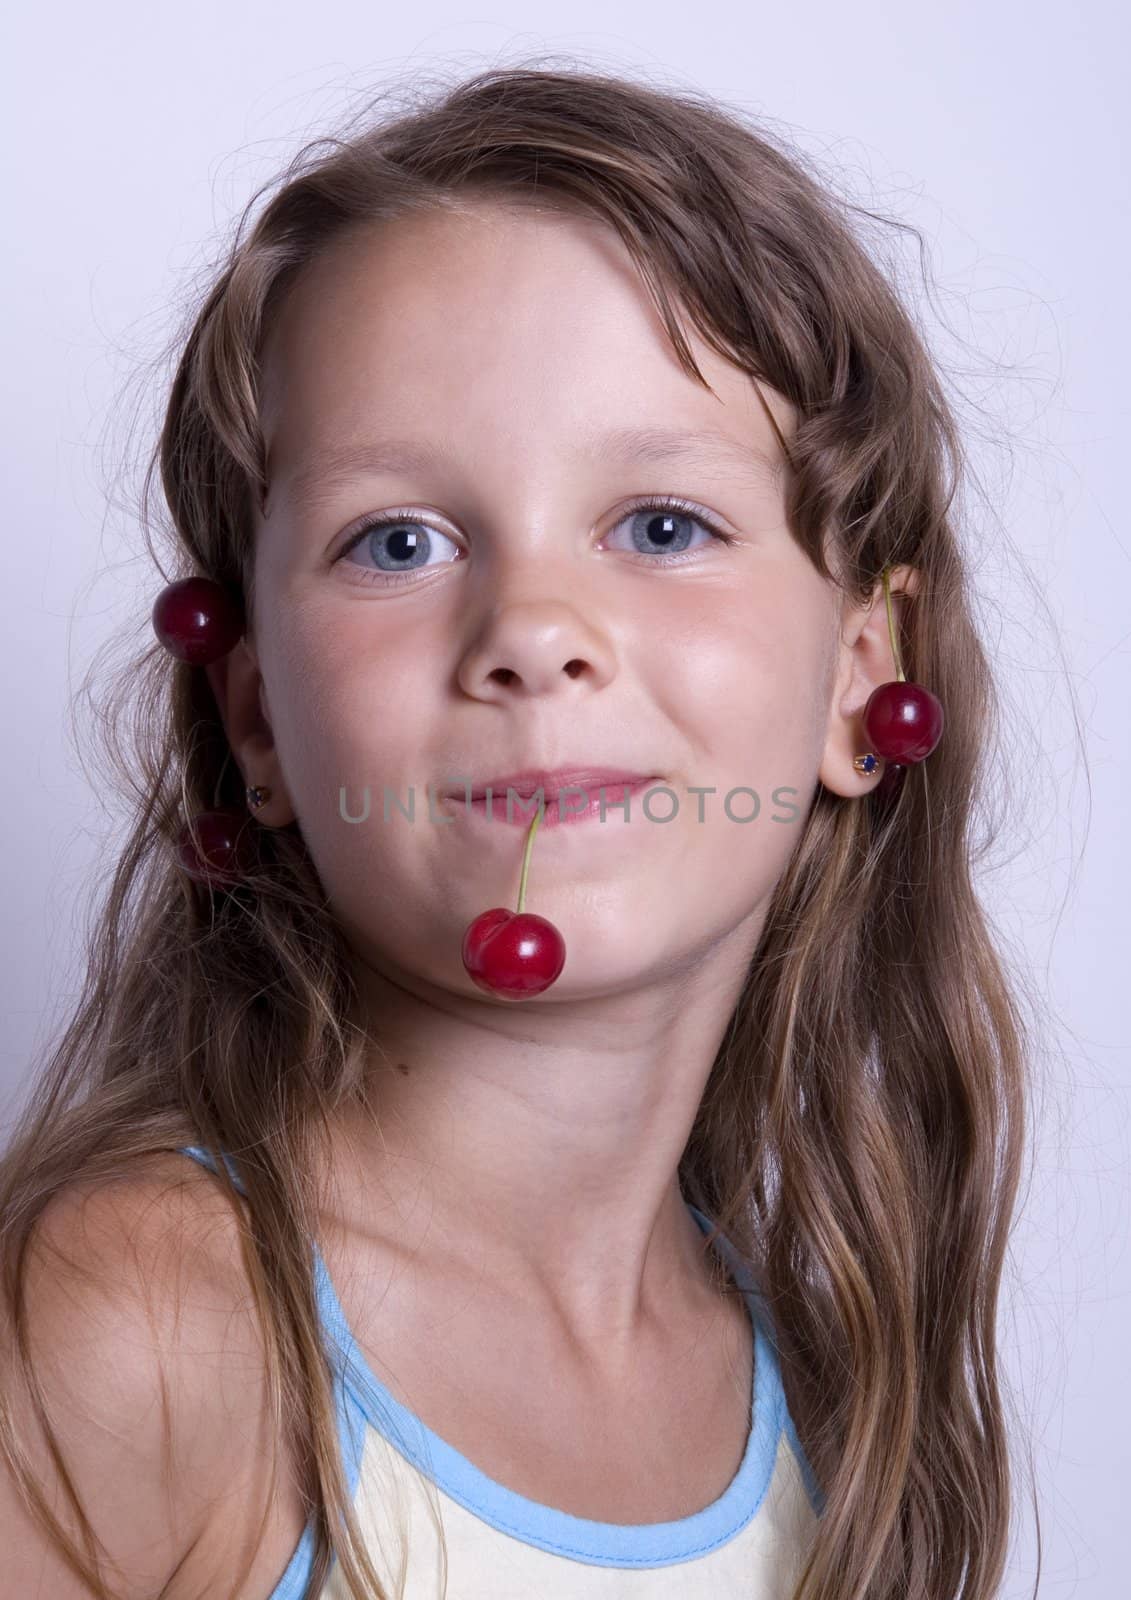 A sweet young girl eating fresh fruit. The child is on a white background